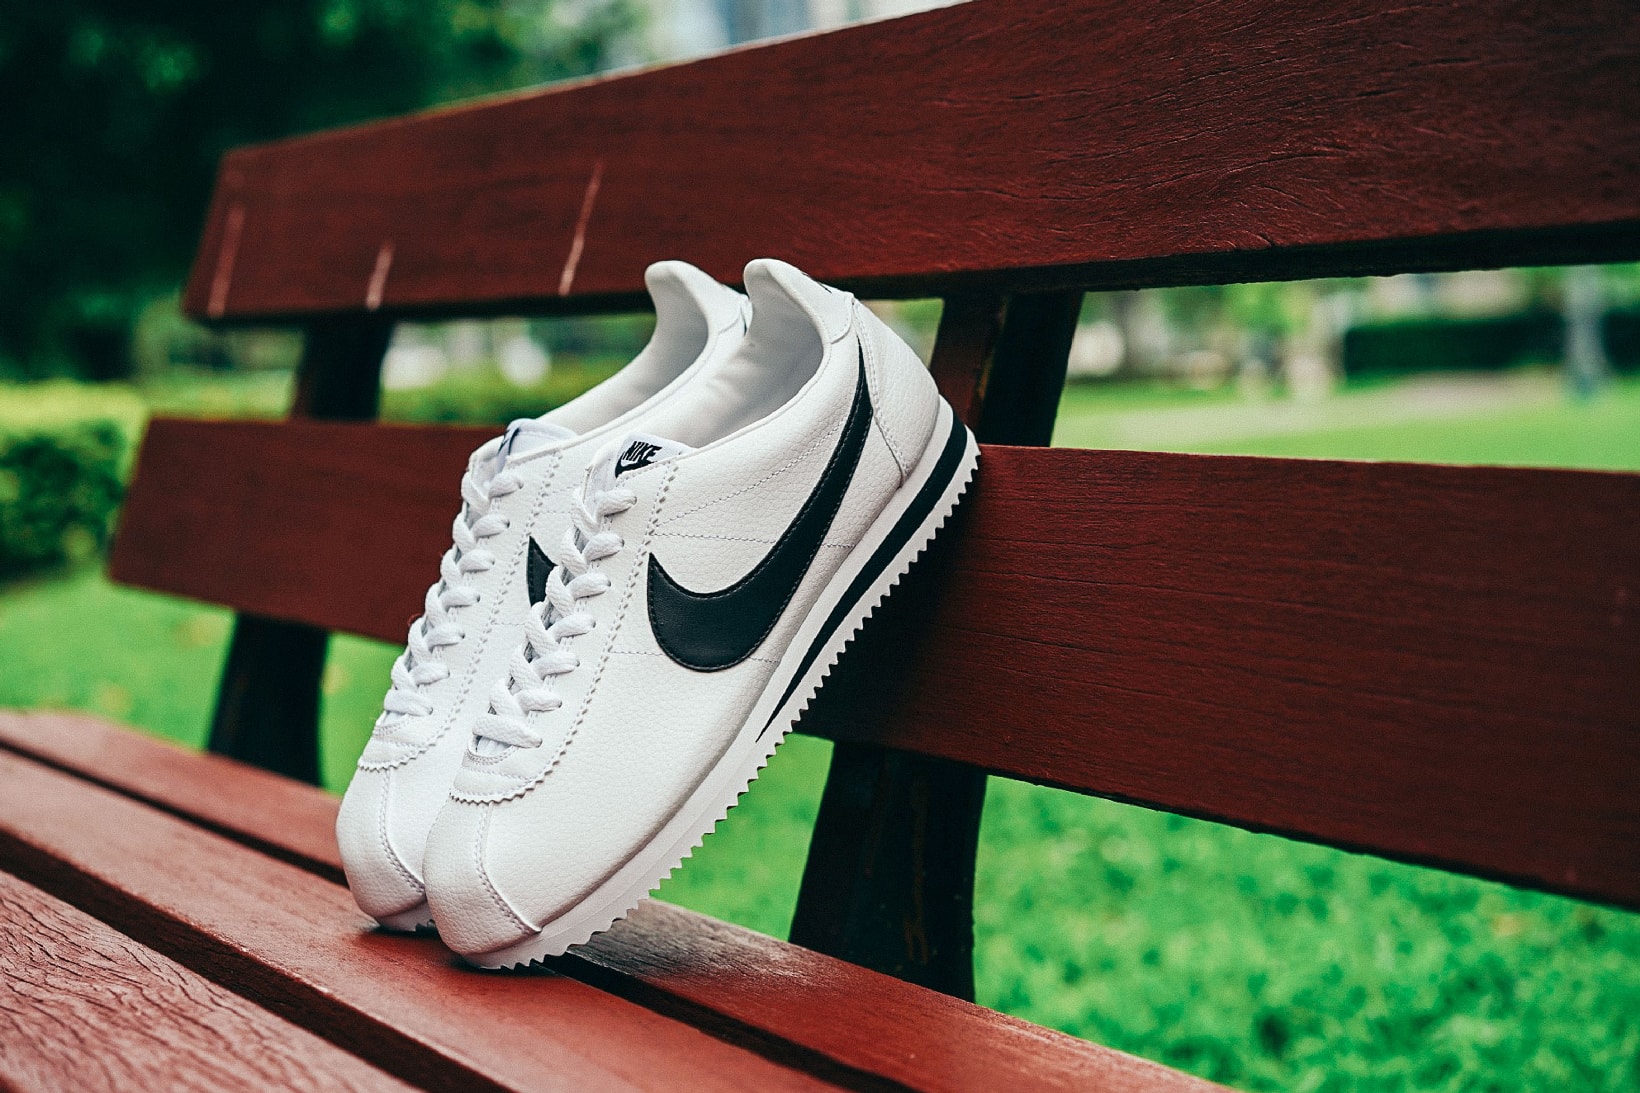 Nike Cortez Returns in Three Colors for Summer